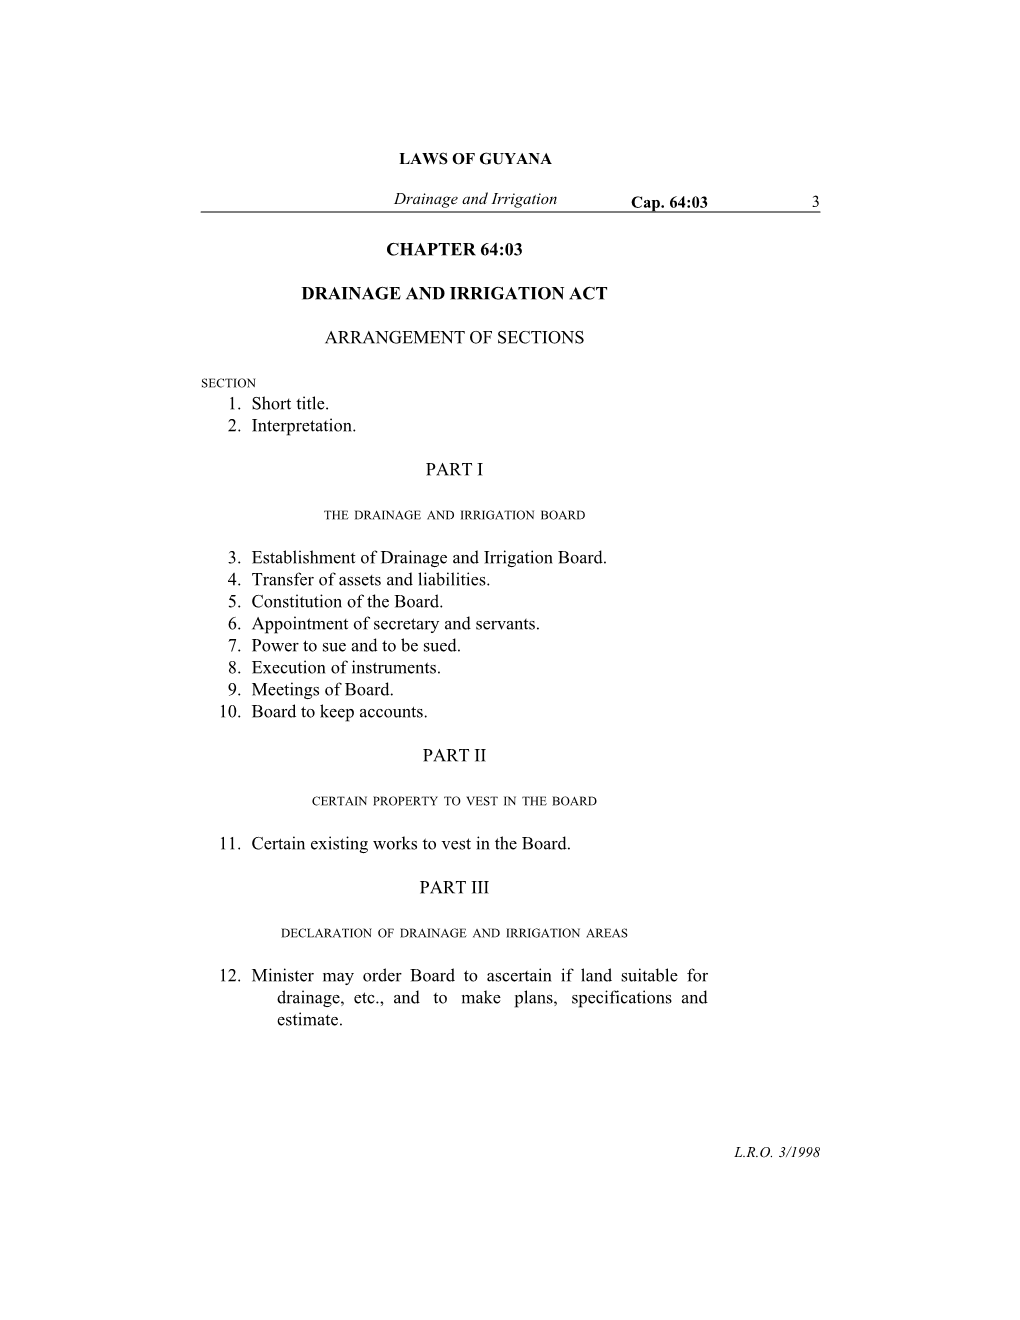 Chapter 64:03 Drainage and Irrigation Act Arrangement